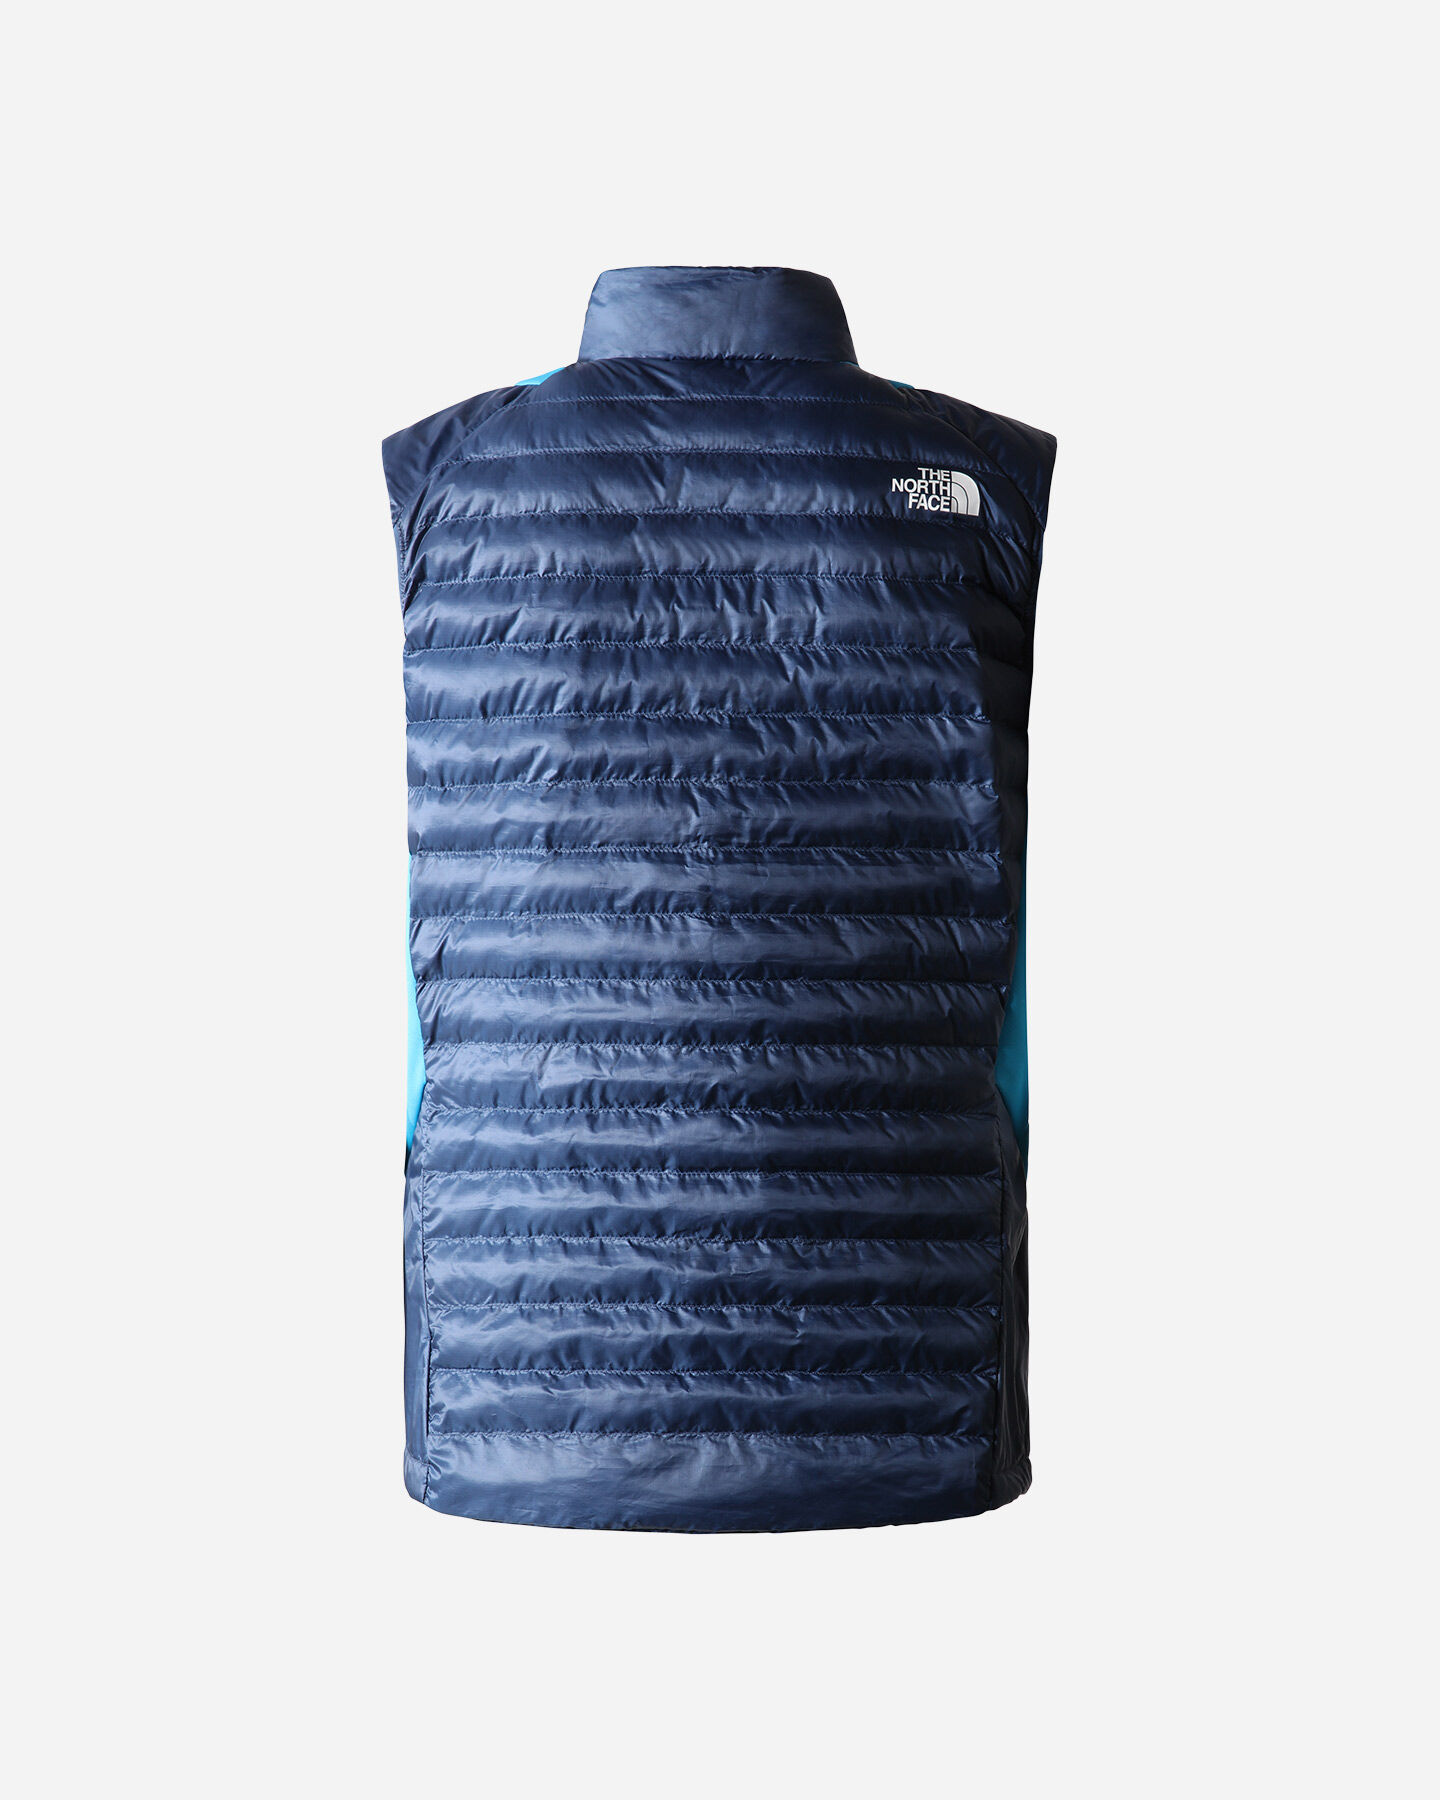  Gilet THE NORTH FACE INSULATION HYBRID M S5474958|83R|S scatto 1